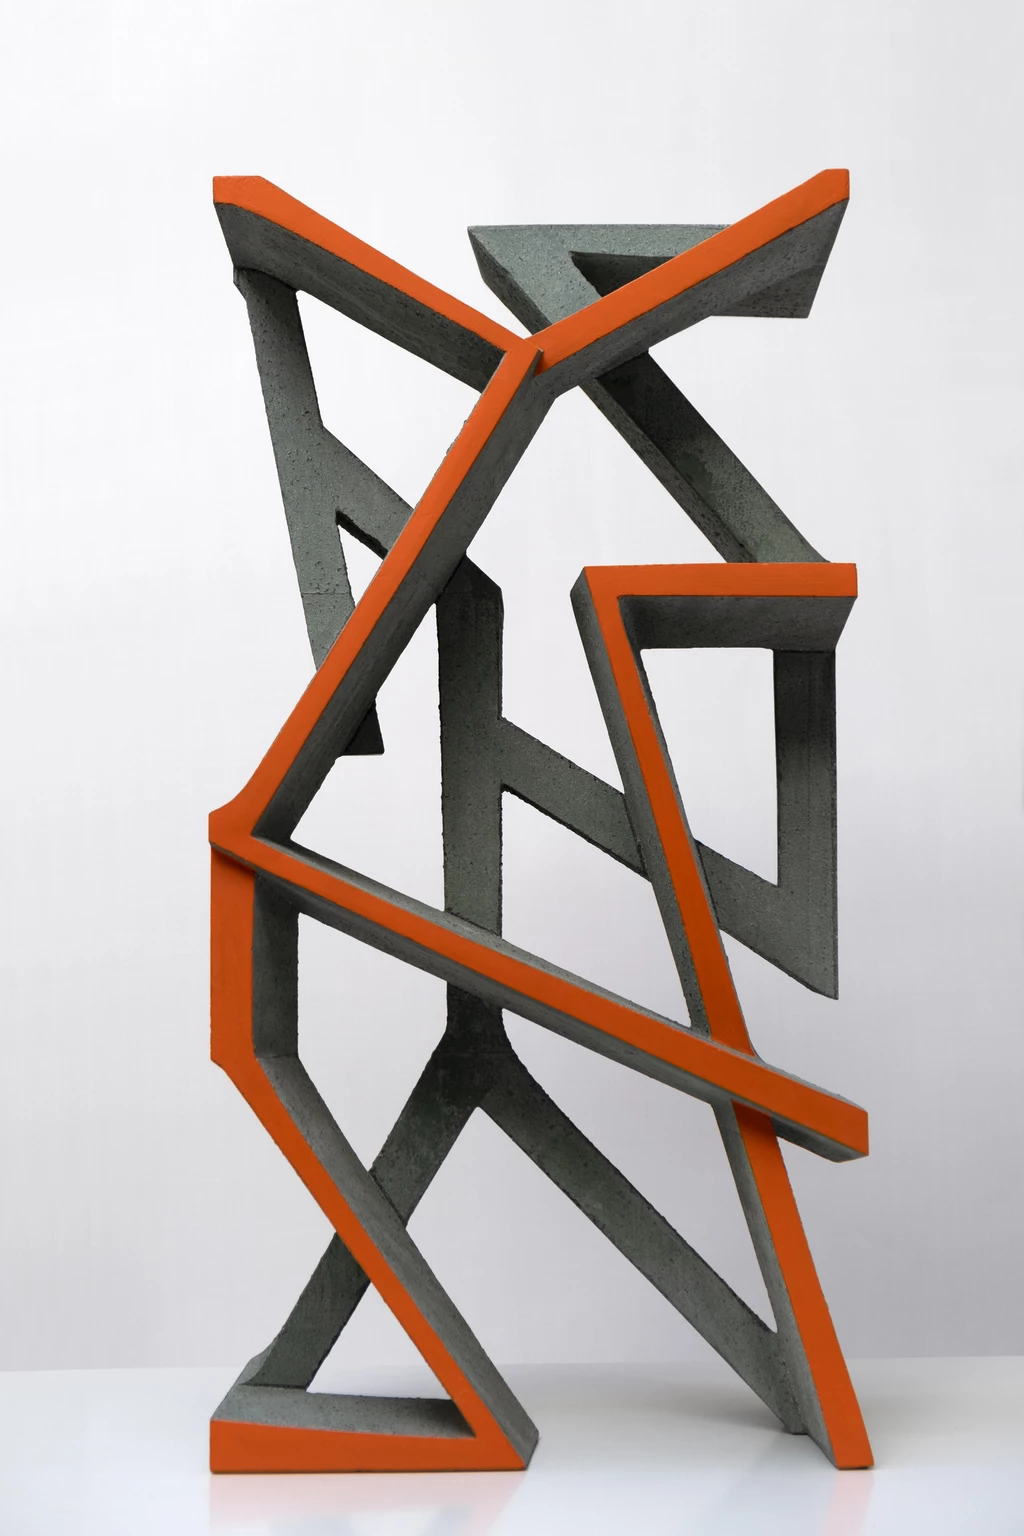 Biner 10., 2020 - colored and painted concrete, 100 x 50 x 33 cm